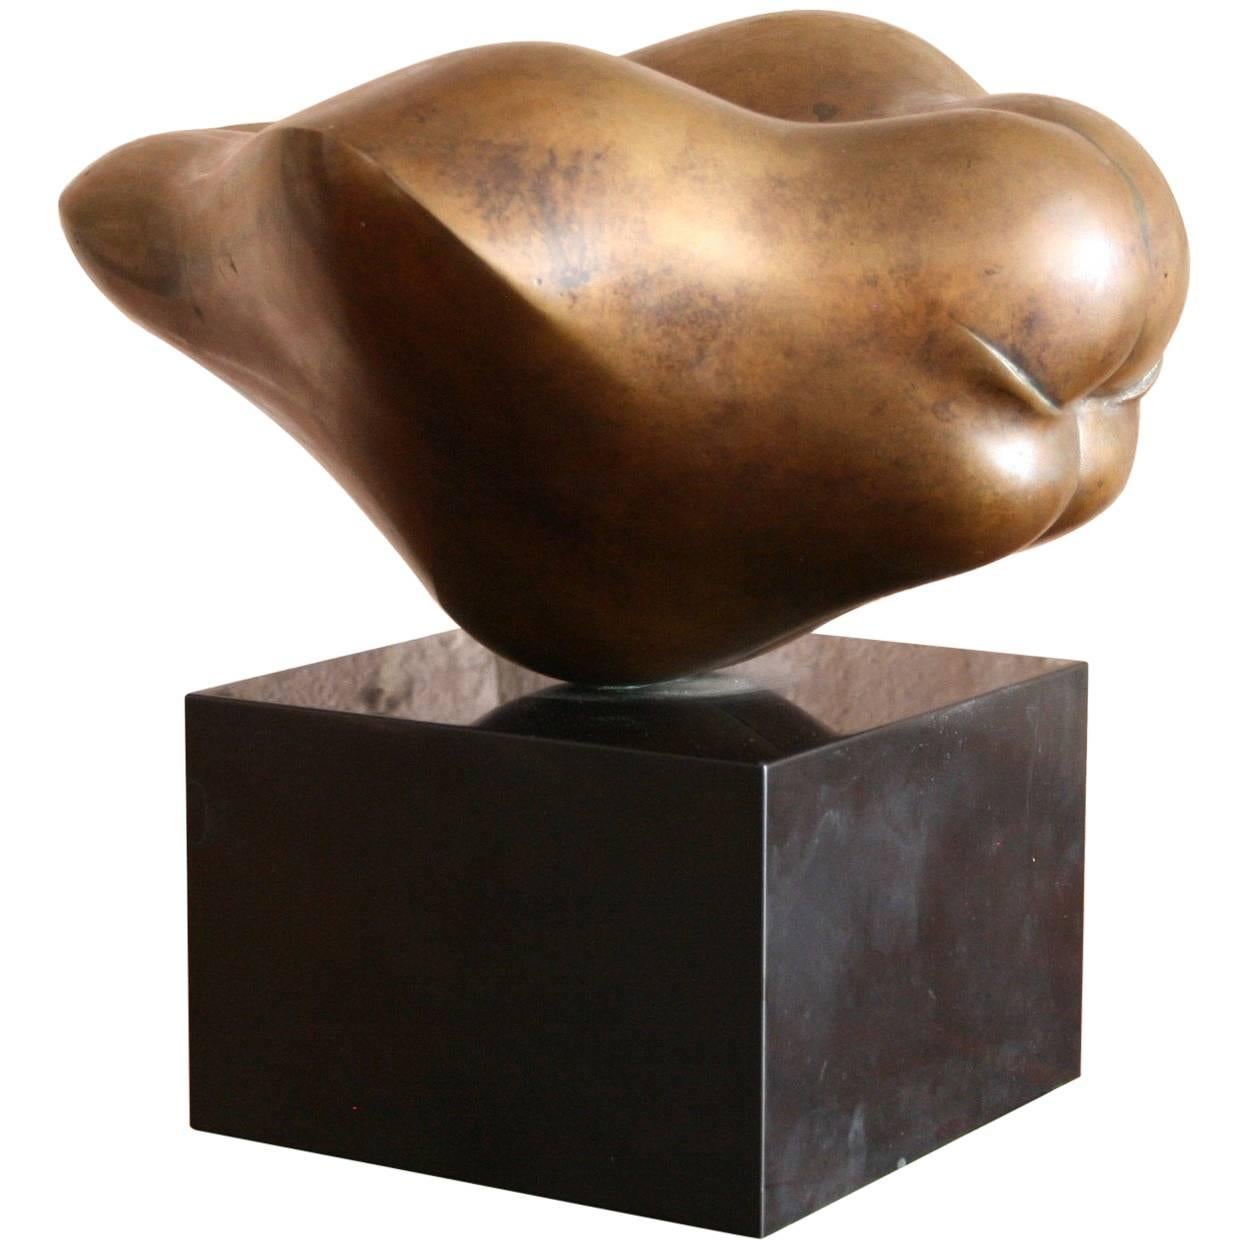 Aldo Casanova Abstract Bronze Sculpture, Signed and Numbered